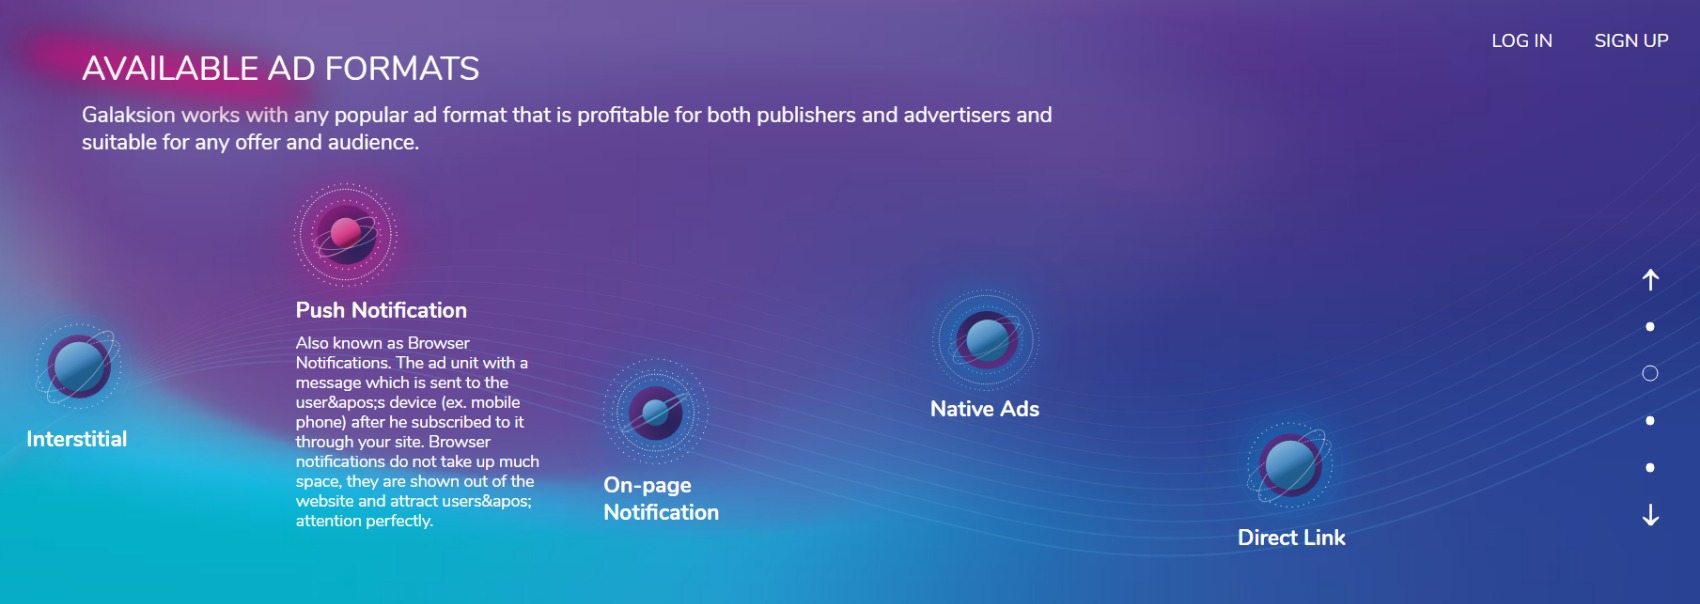 Ad Formats Provided by Galaksion